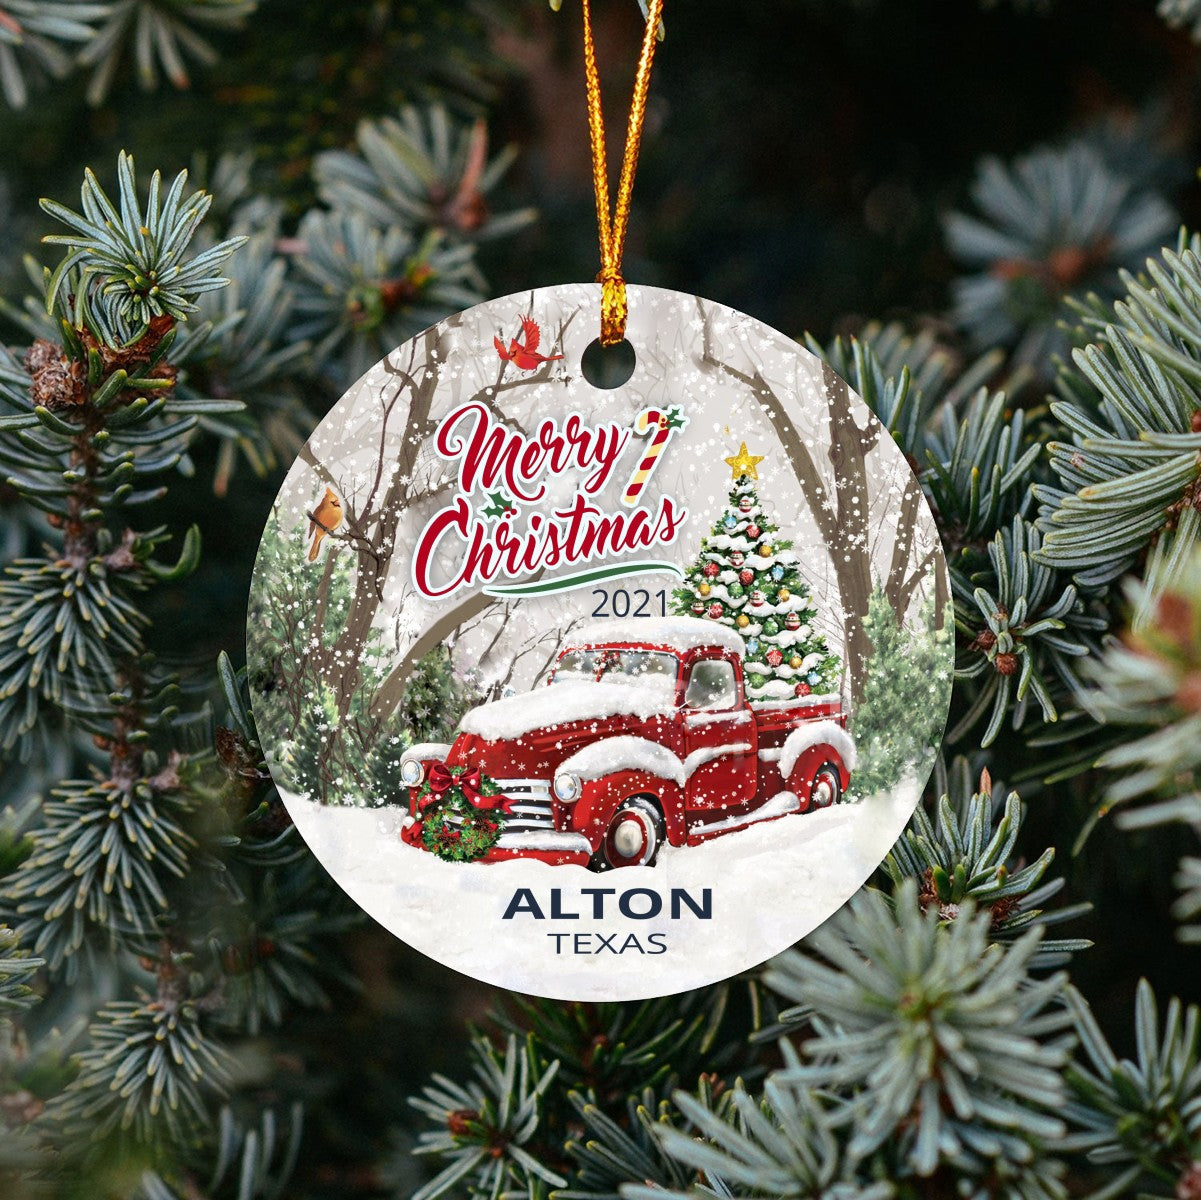 Christmas Tree Ornaments Alton - Ornament With Name City, State Alton Texas TX Ornament - Red Truck Xmas Ornaments 3'' Plastic Gift For Family, Friend And Housewarming